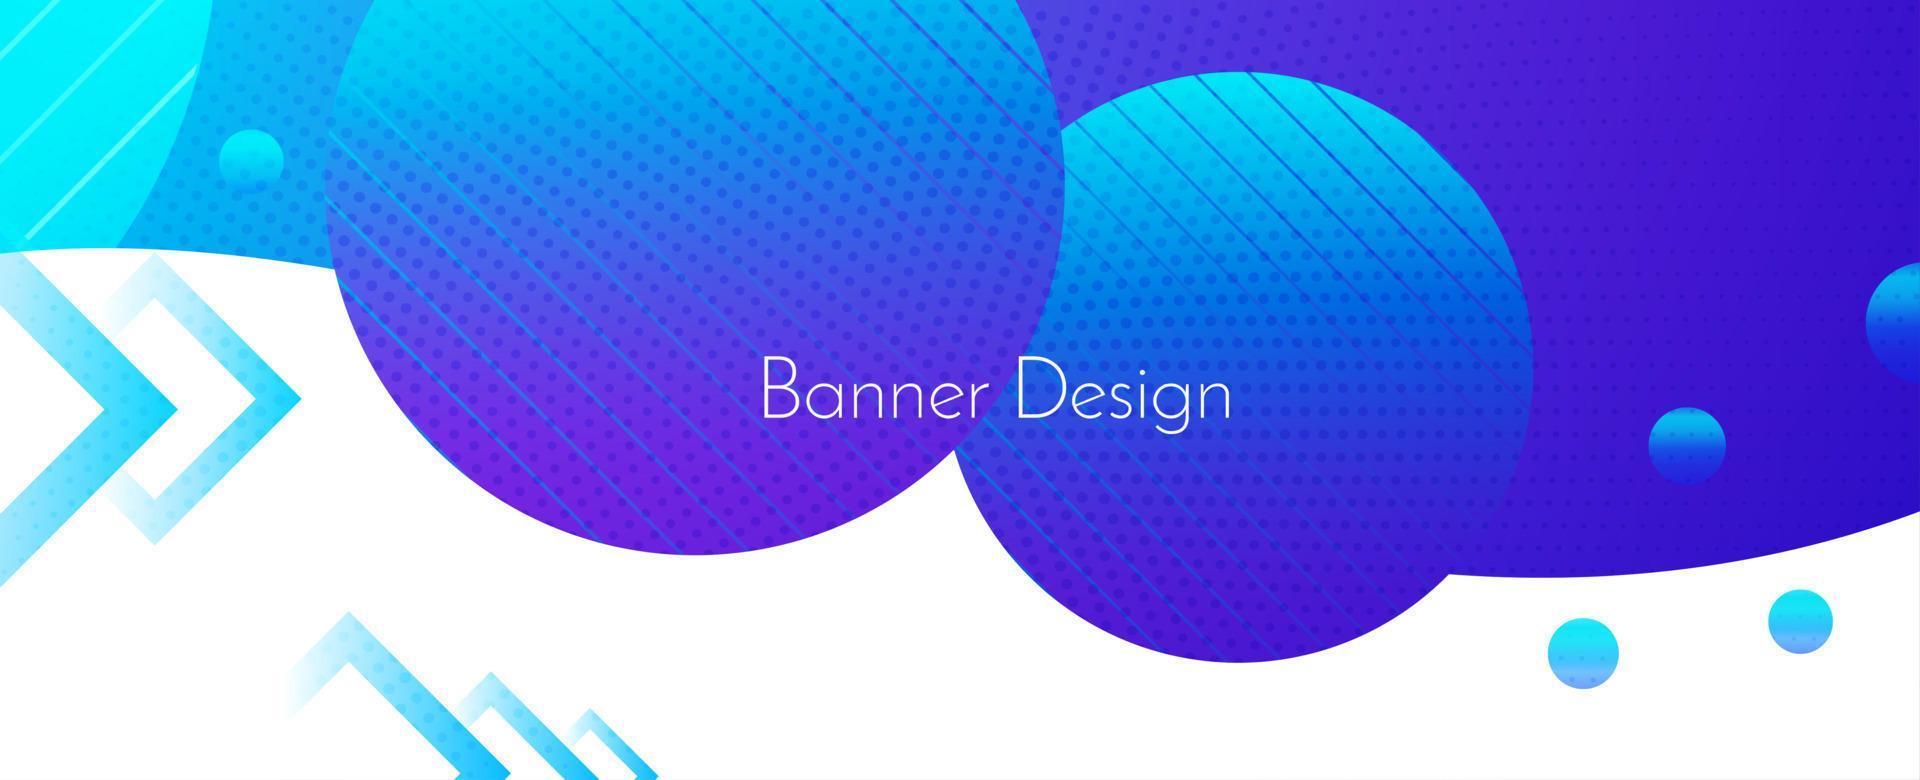 Abstract geometric blue modern decorative design banner pattern background vector